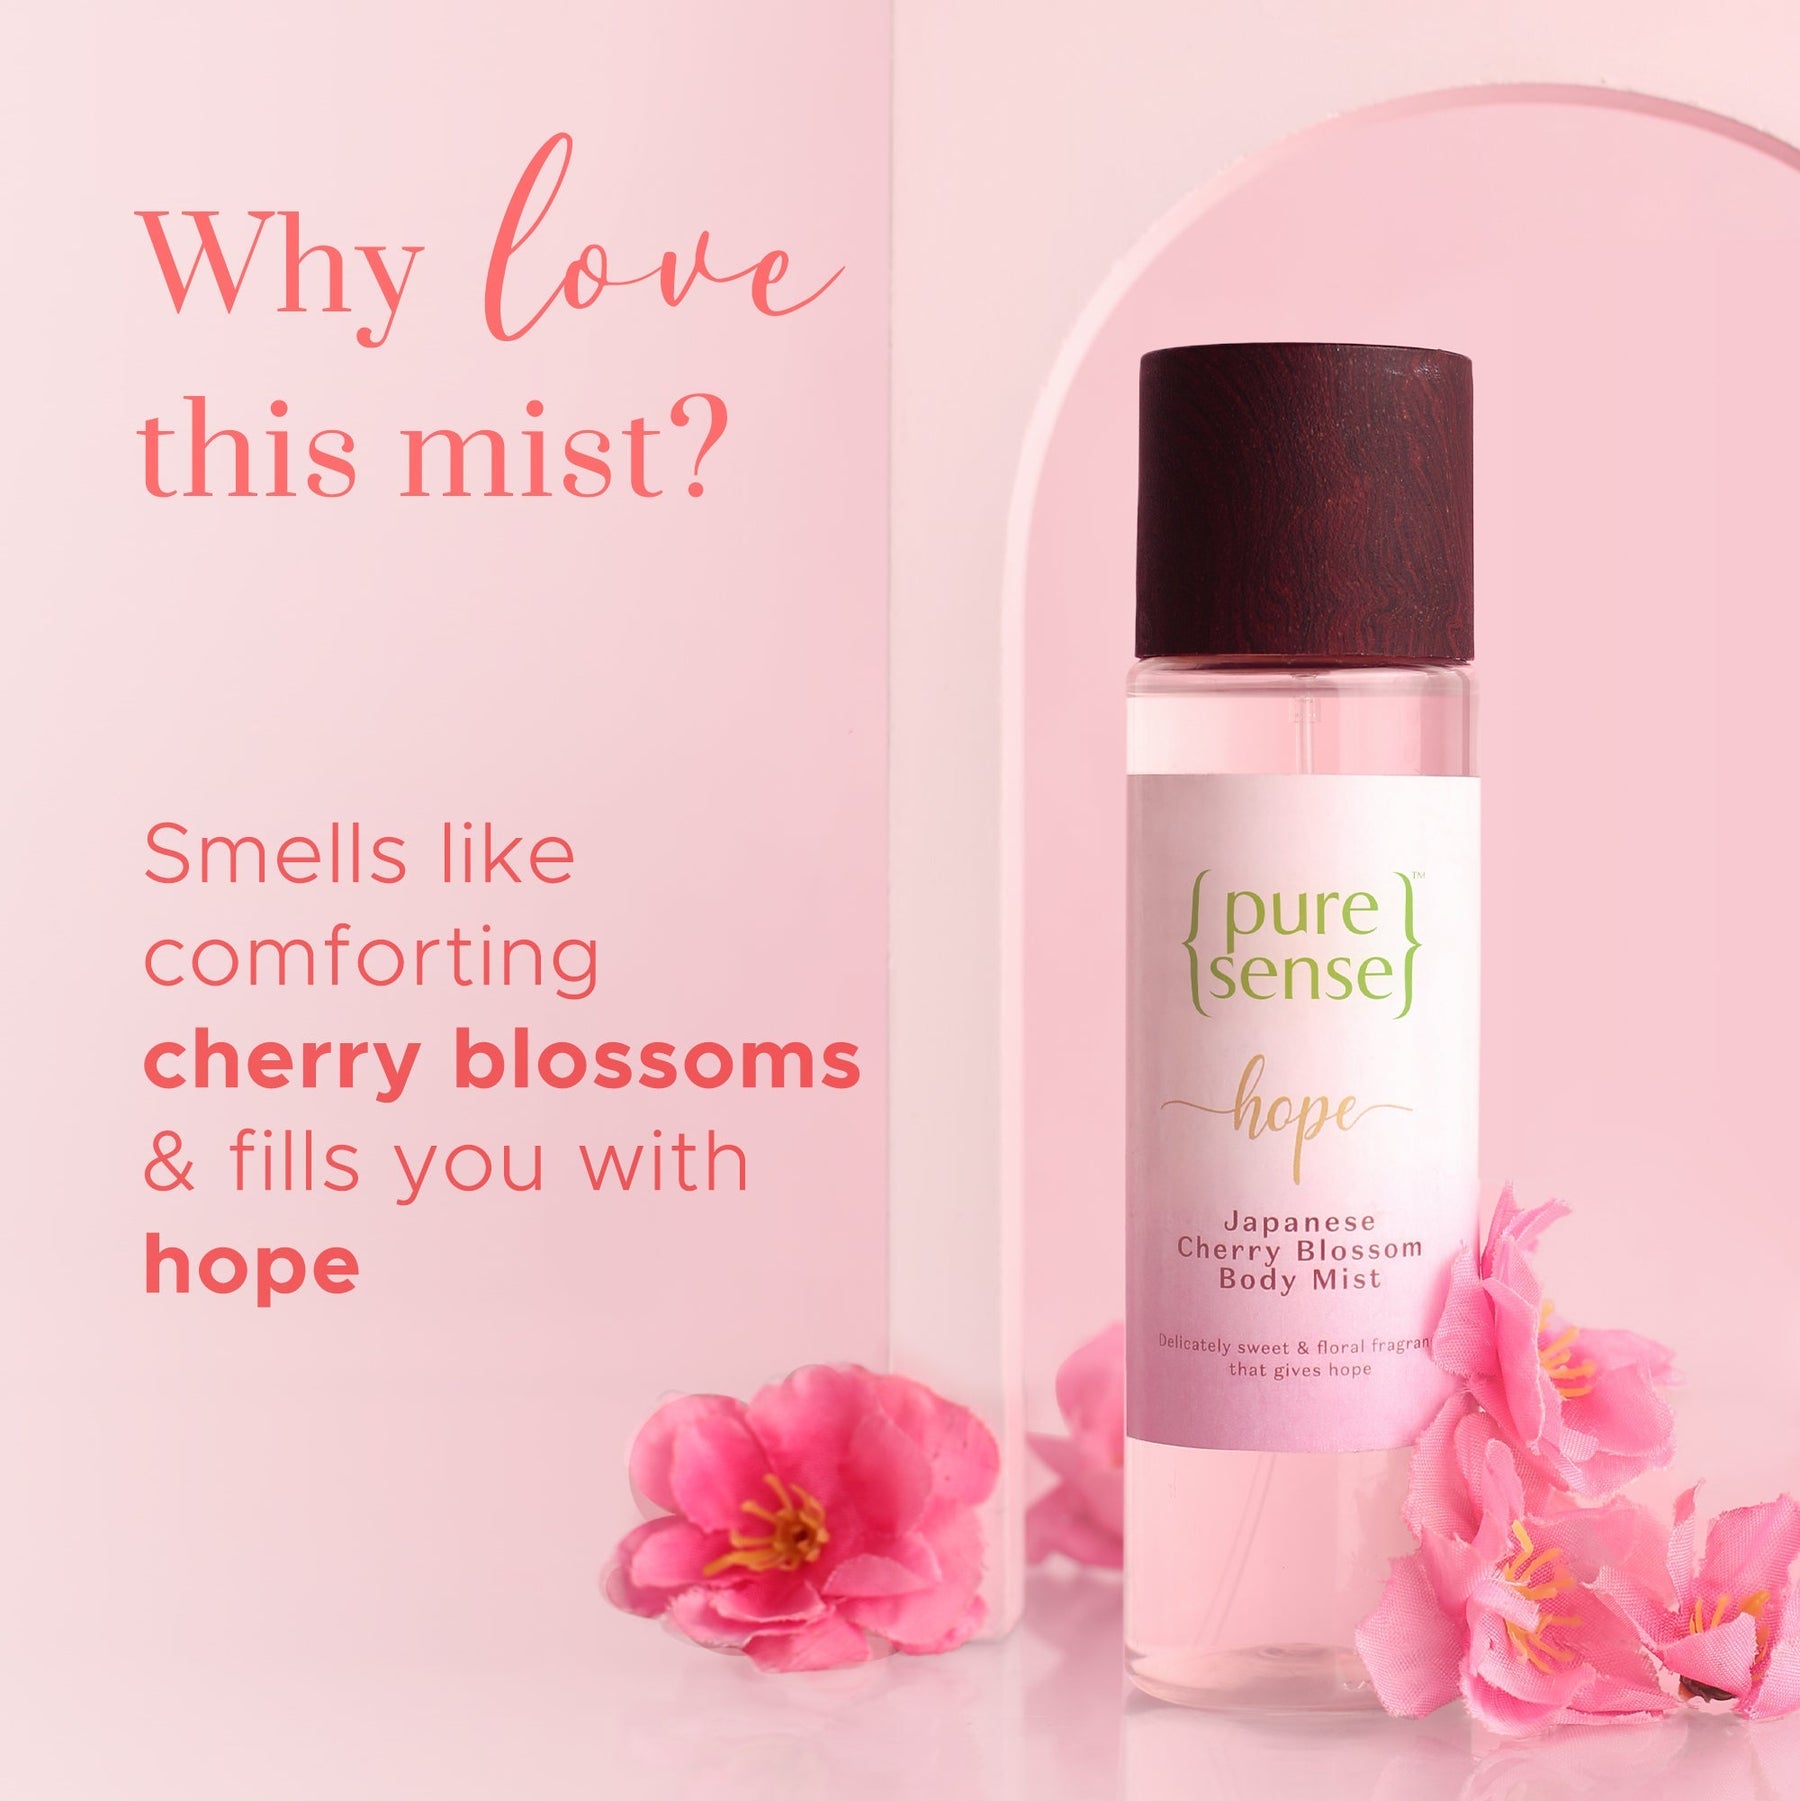 Hope Japanese Cherry Blossom Body Mist (Pack of 2) | From the makers of Parachute Advansed | 300ml